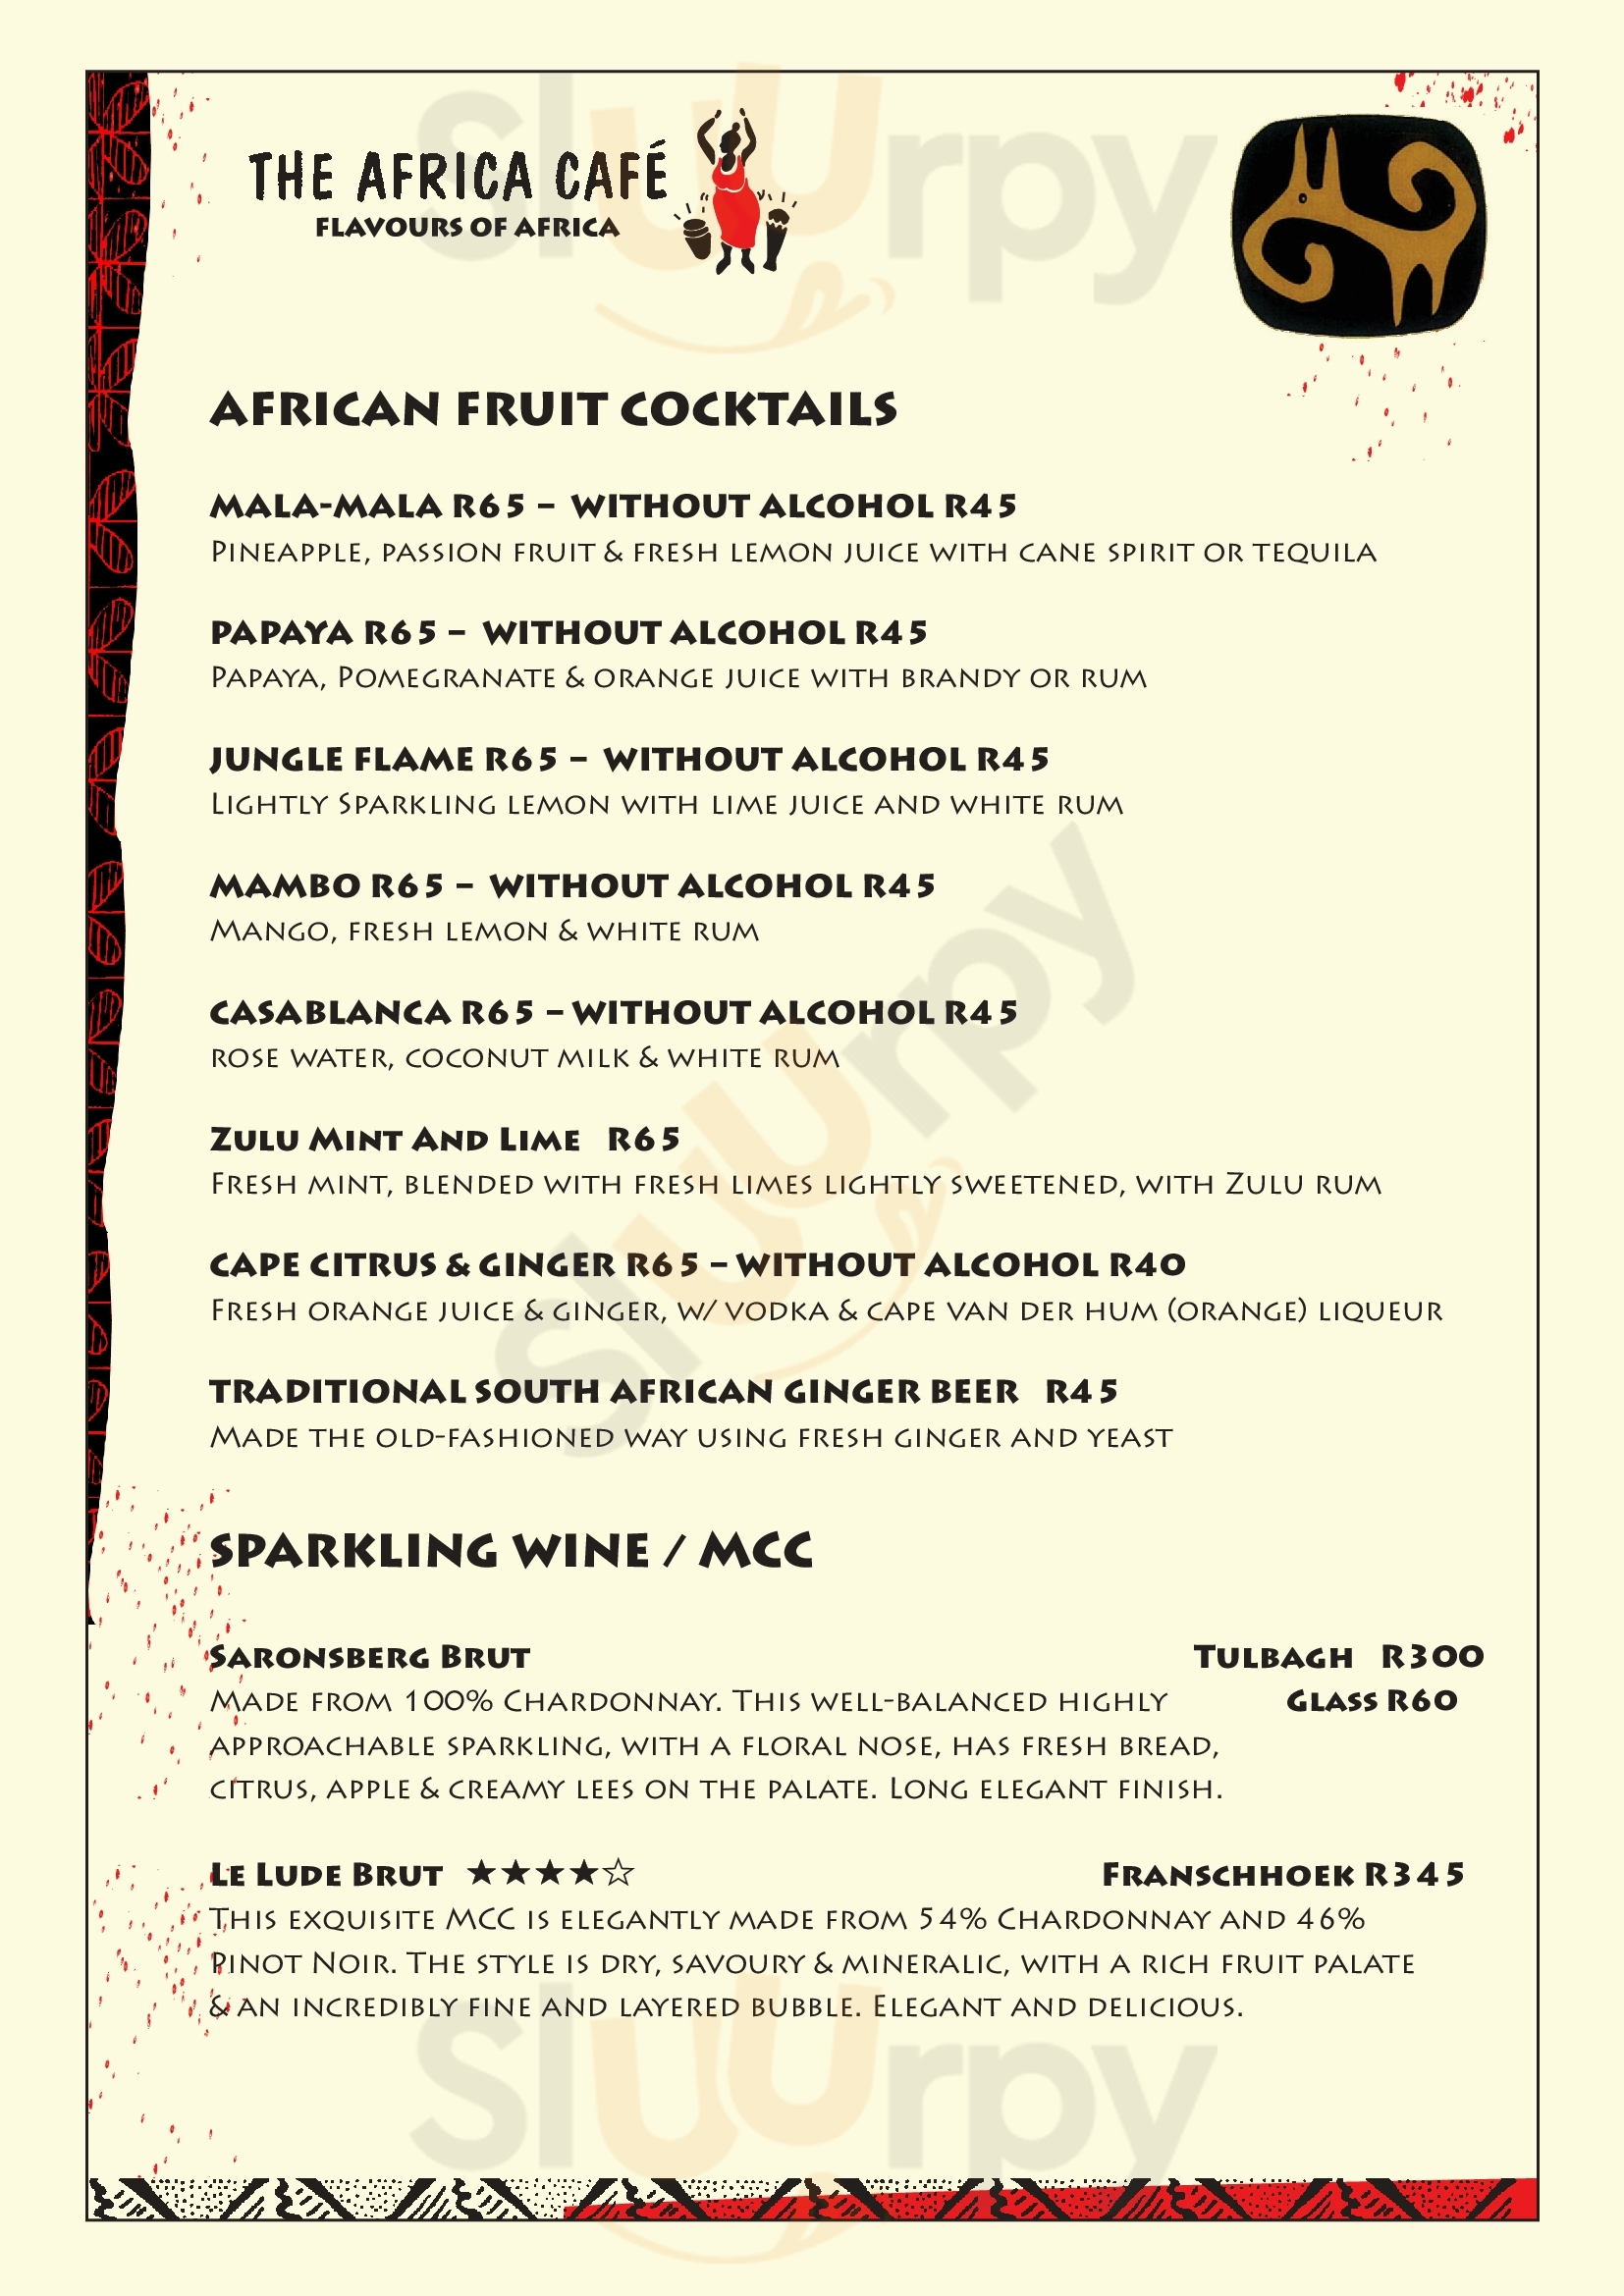 The Africa Cafe' Restaurant Cape Town Central Menu - 1